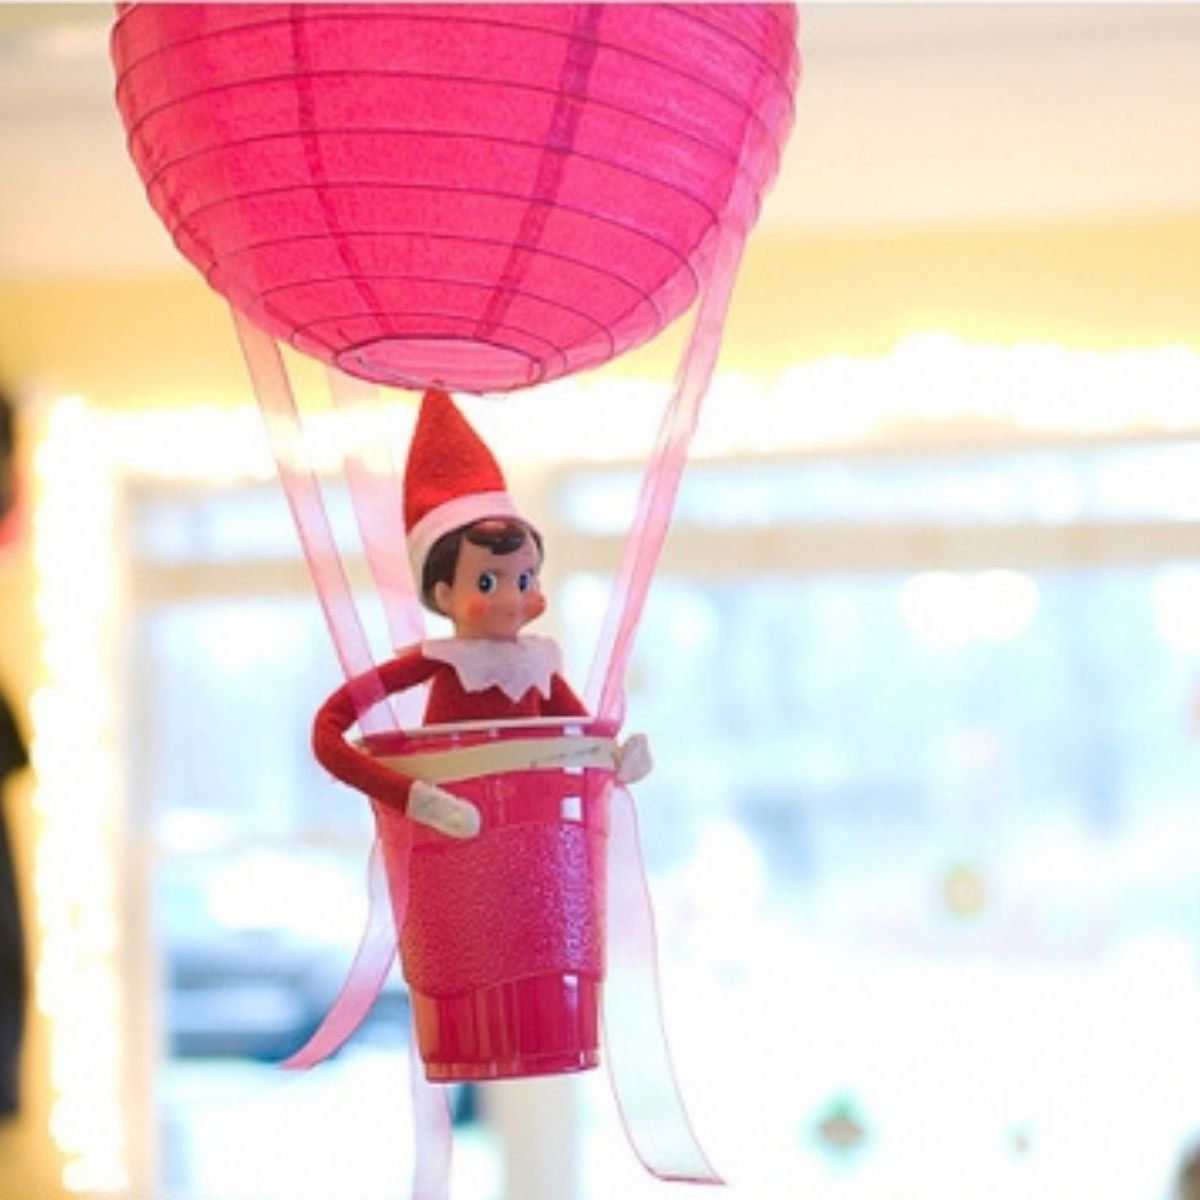 The Elf on the Shelf is sitting in a homemade 'hot air balloon' made from a red plastic cup and a streamer.